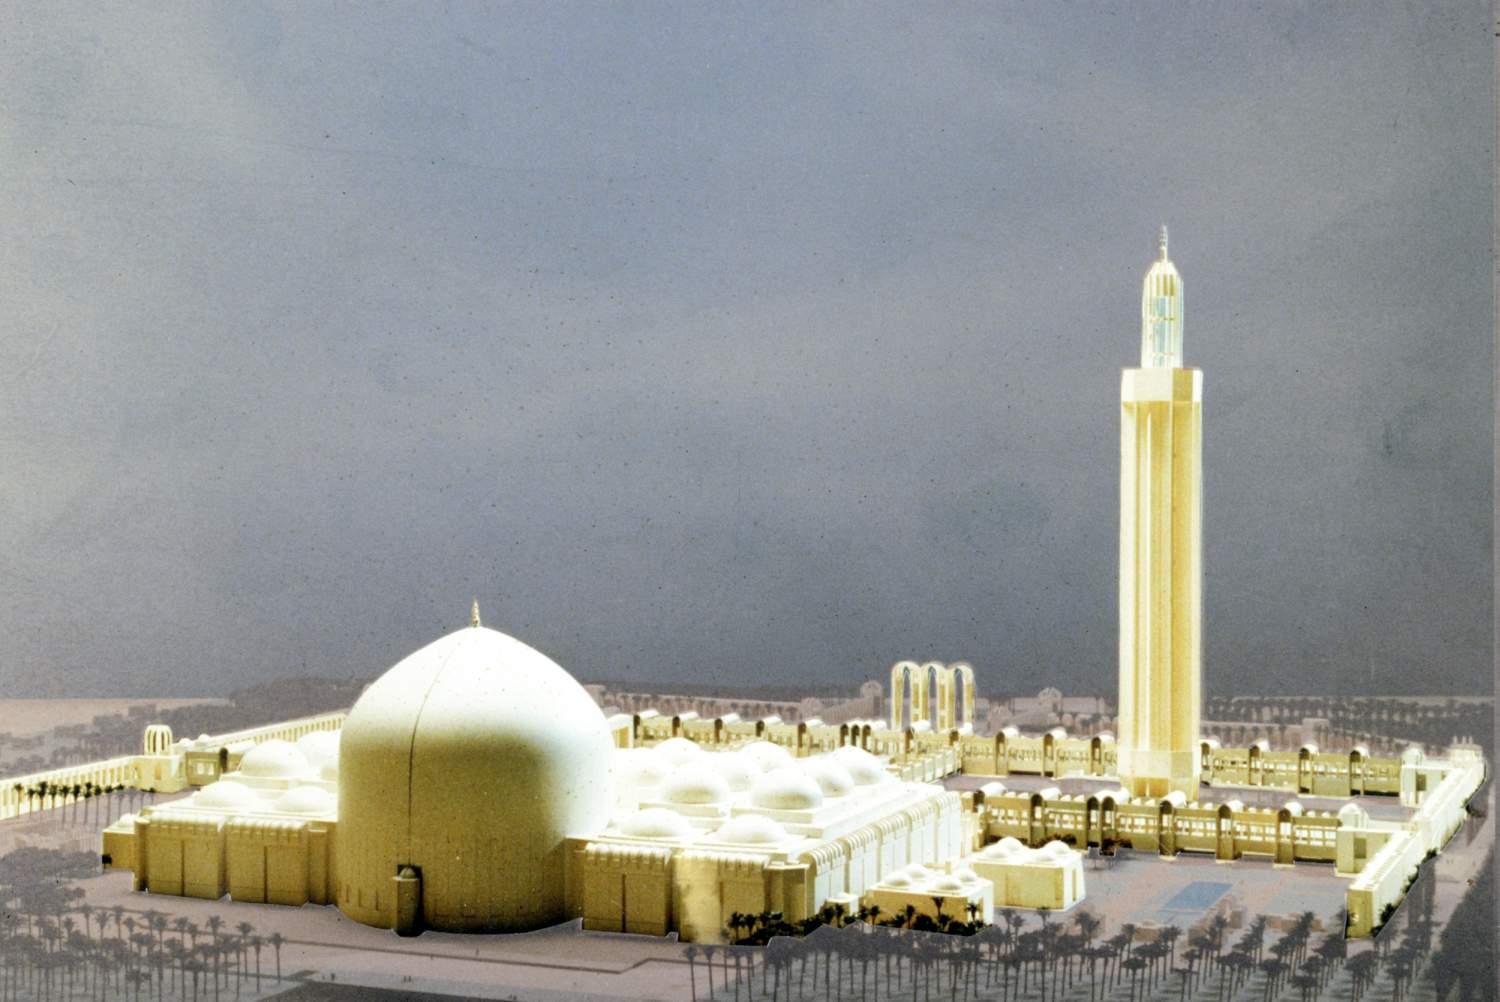 <p>View of model with exterior of mihrab at the base of the main dome in foreground, to the multi-domed prayer hall, riwaq, boundary walls, minaret, and arches of the main entrance gate highlighted.</p>